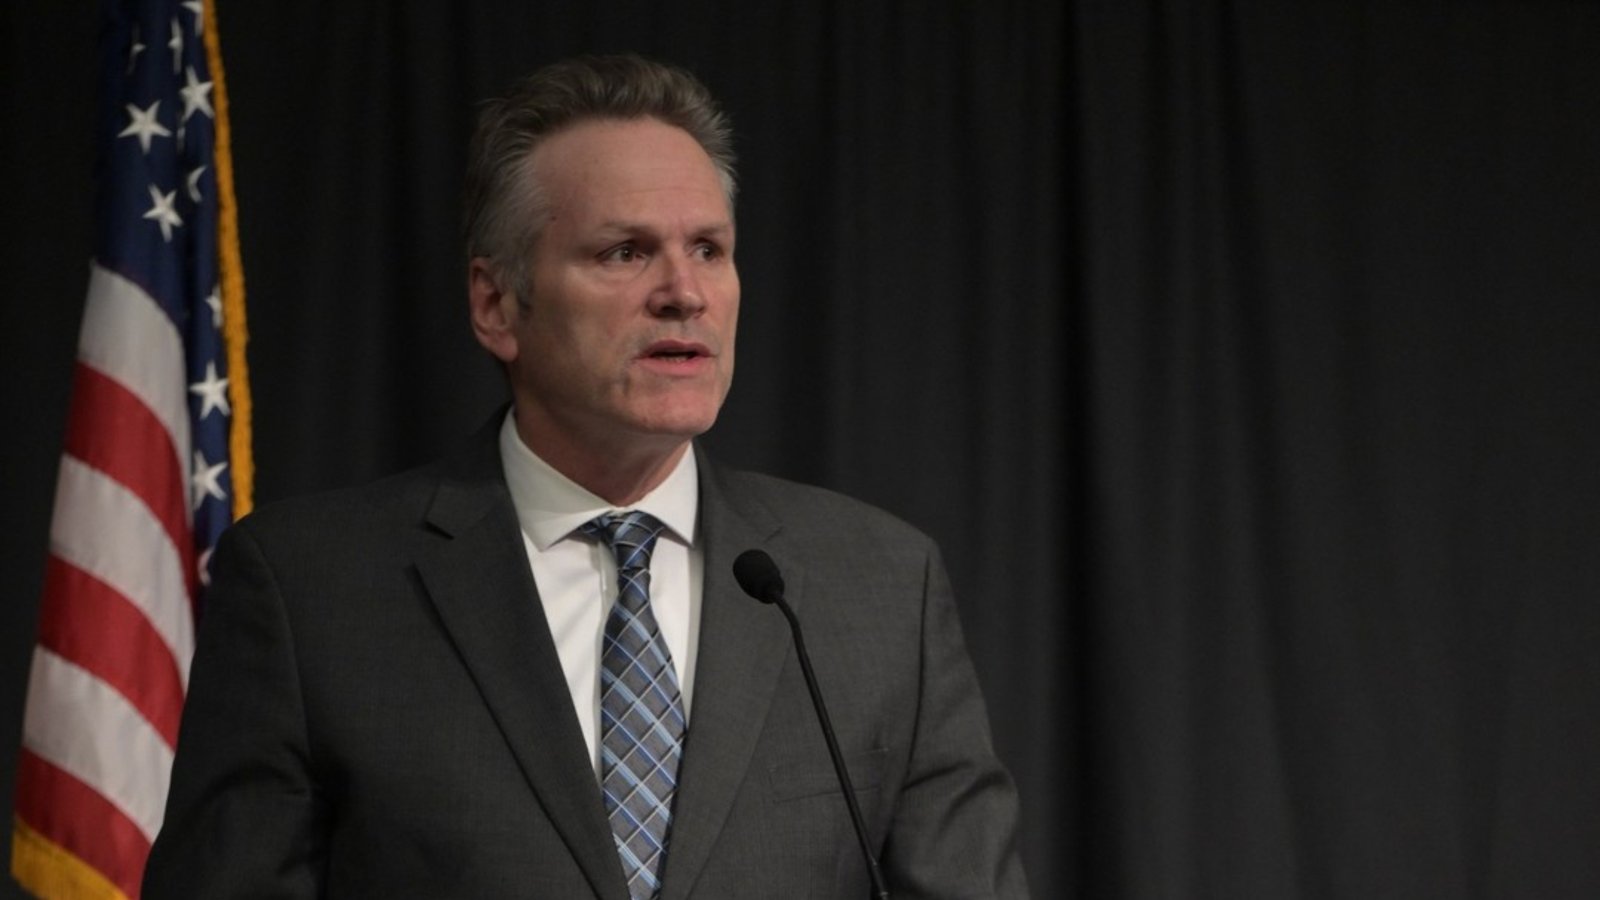 Governor Dunleavy Expresses Concern Over Unidentified Object Shot Down in Alaskan Waters